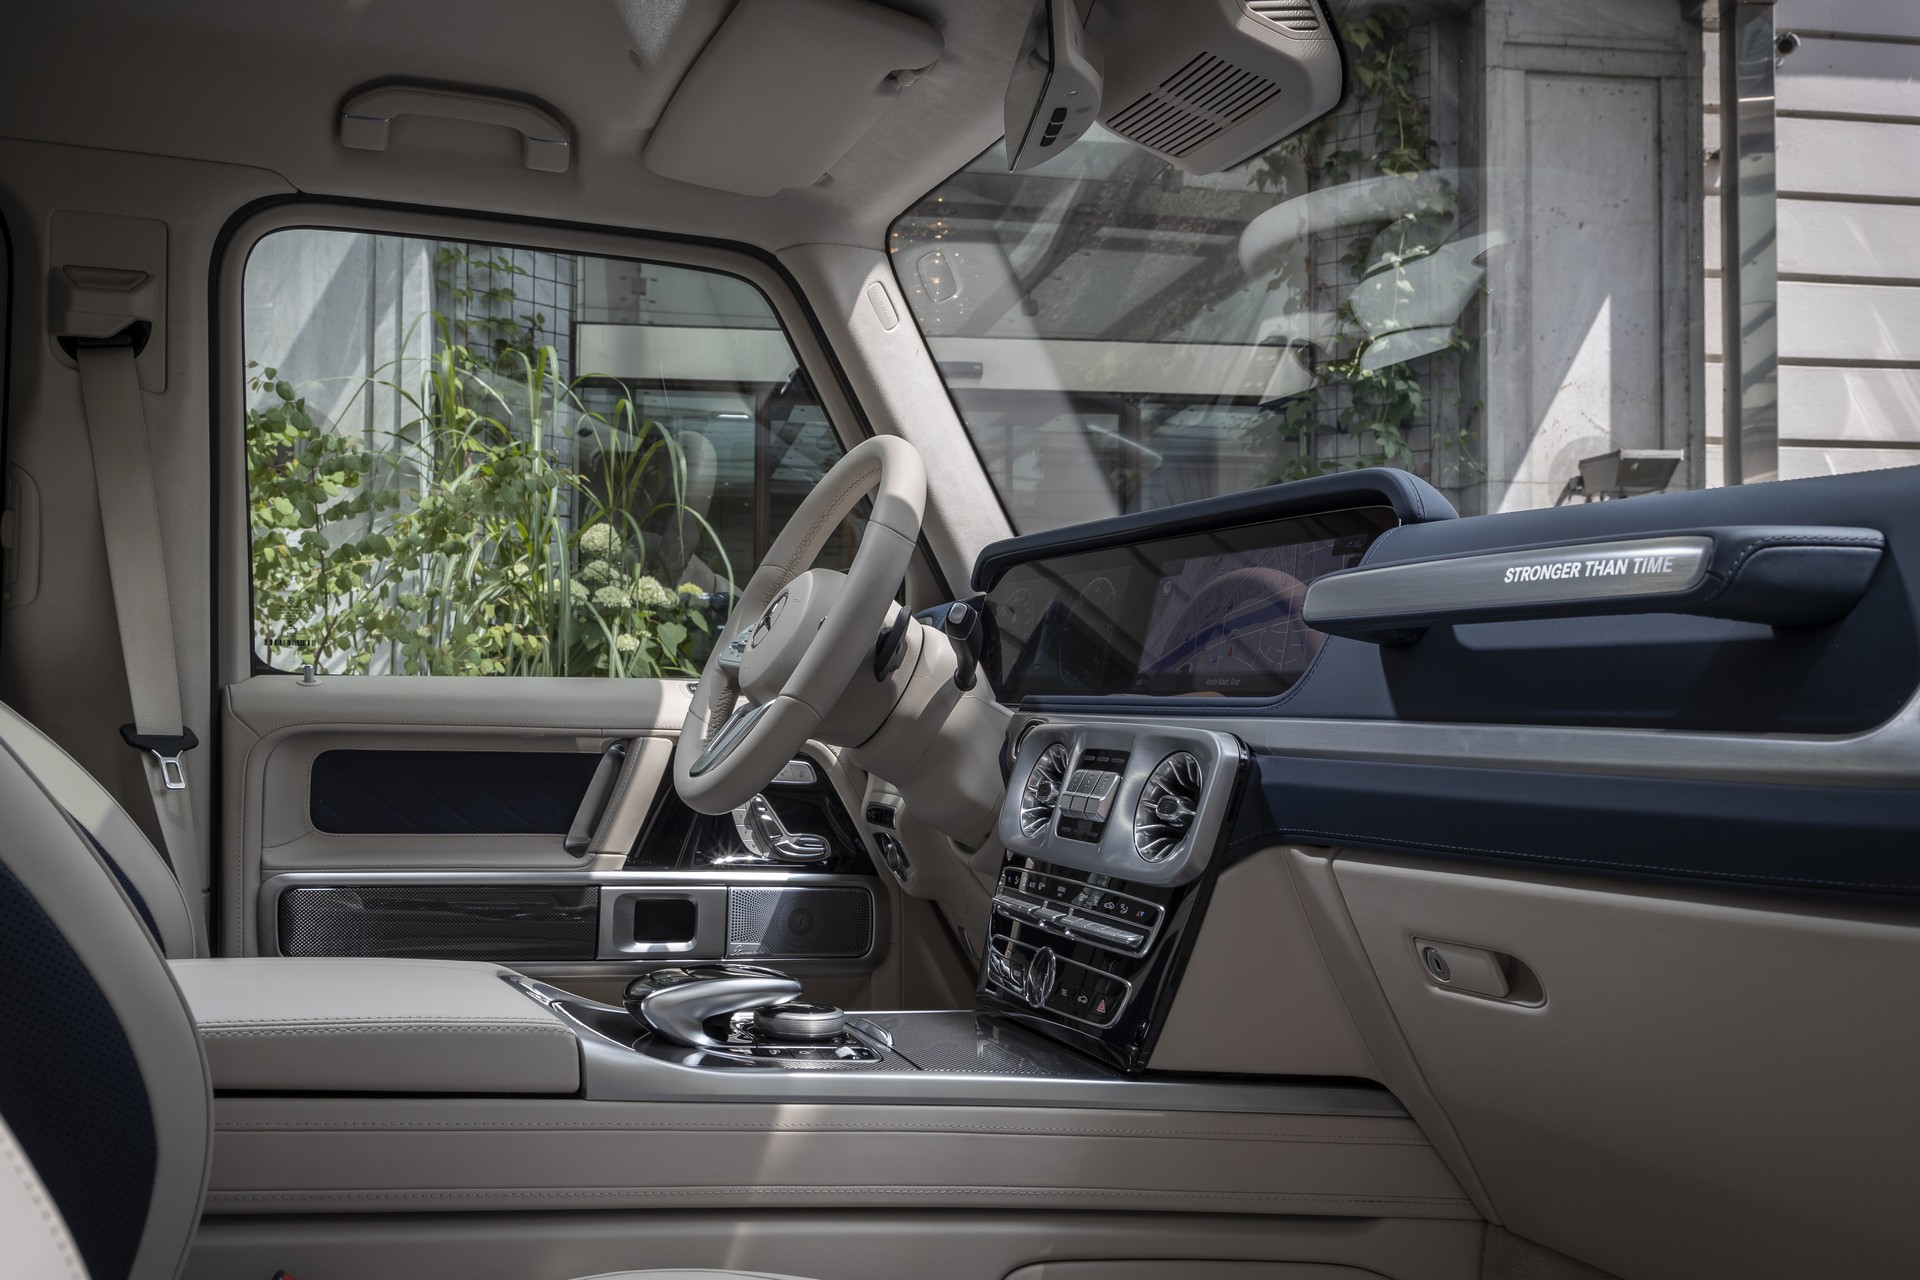 Mercedes G Class Stronger Than Time Edition Celebrates Model S